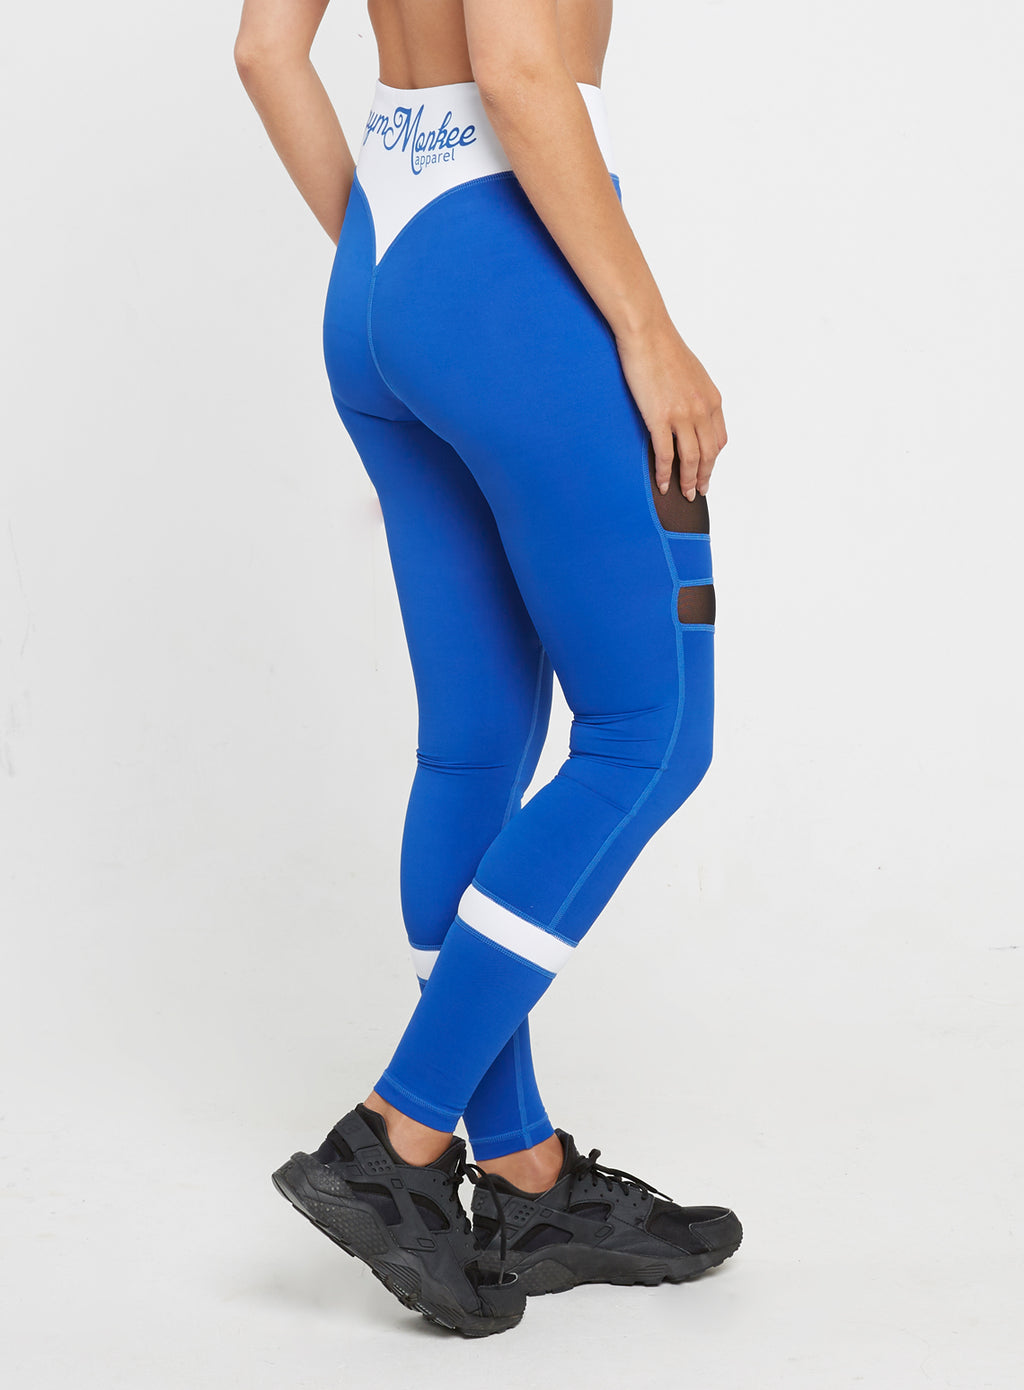 Gym Monkee - Ladies Blue and White Leggings RIGHT